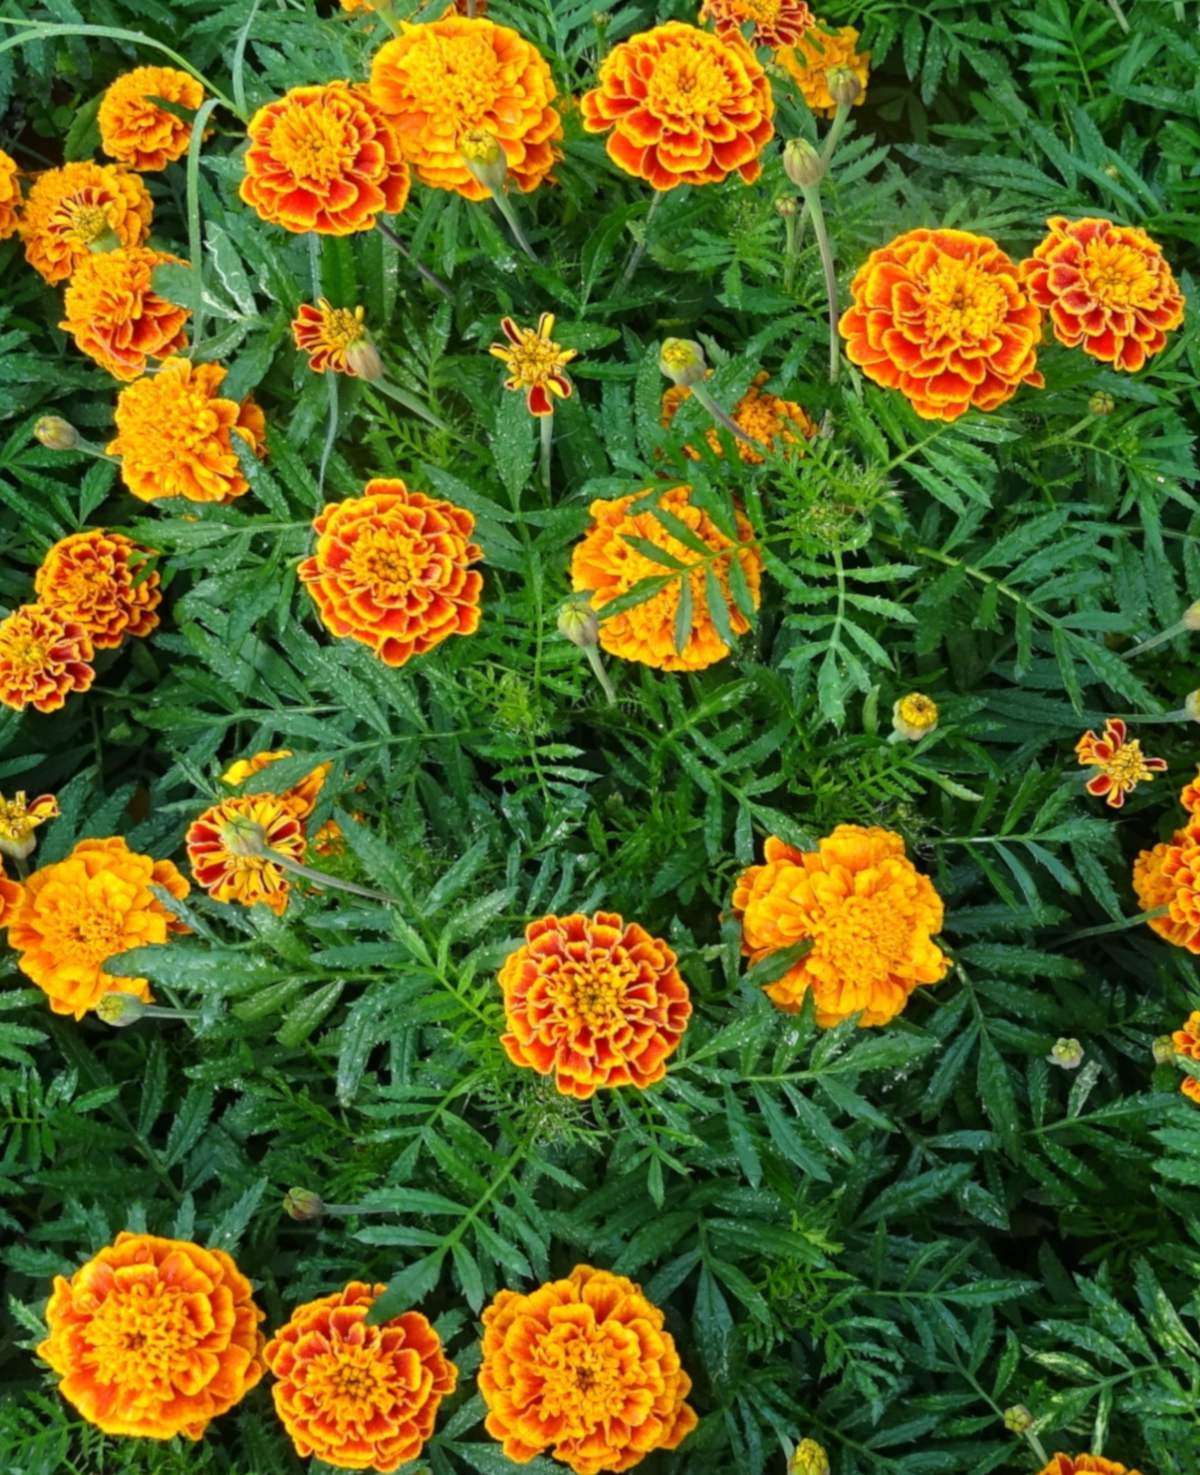 French marigolds from above